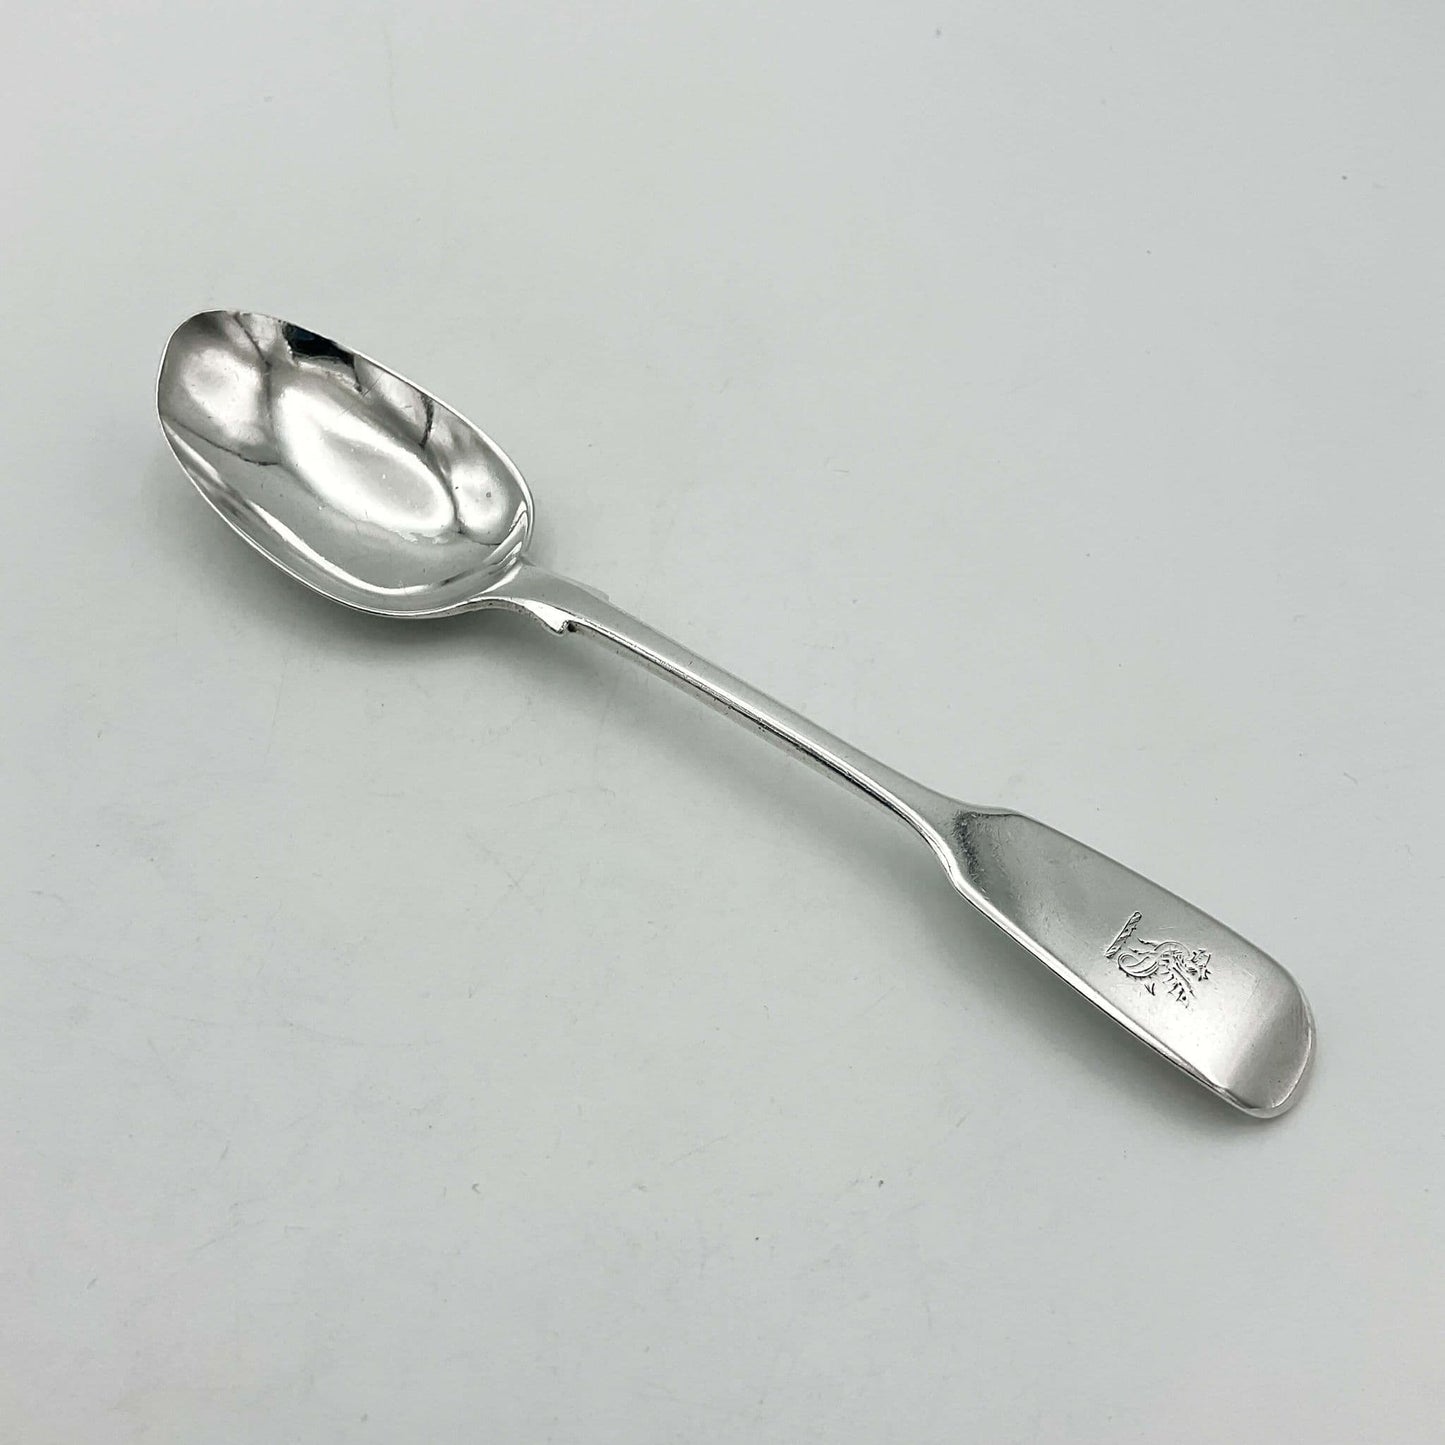 Antique silver teaspoon on a white background